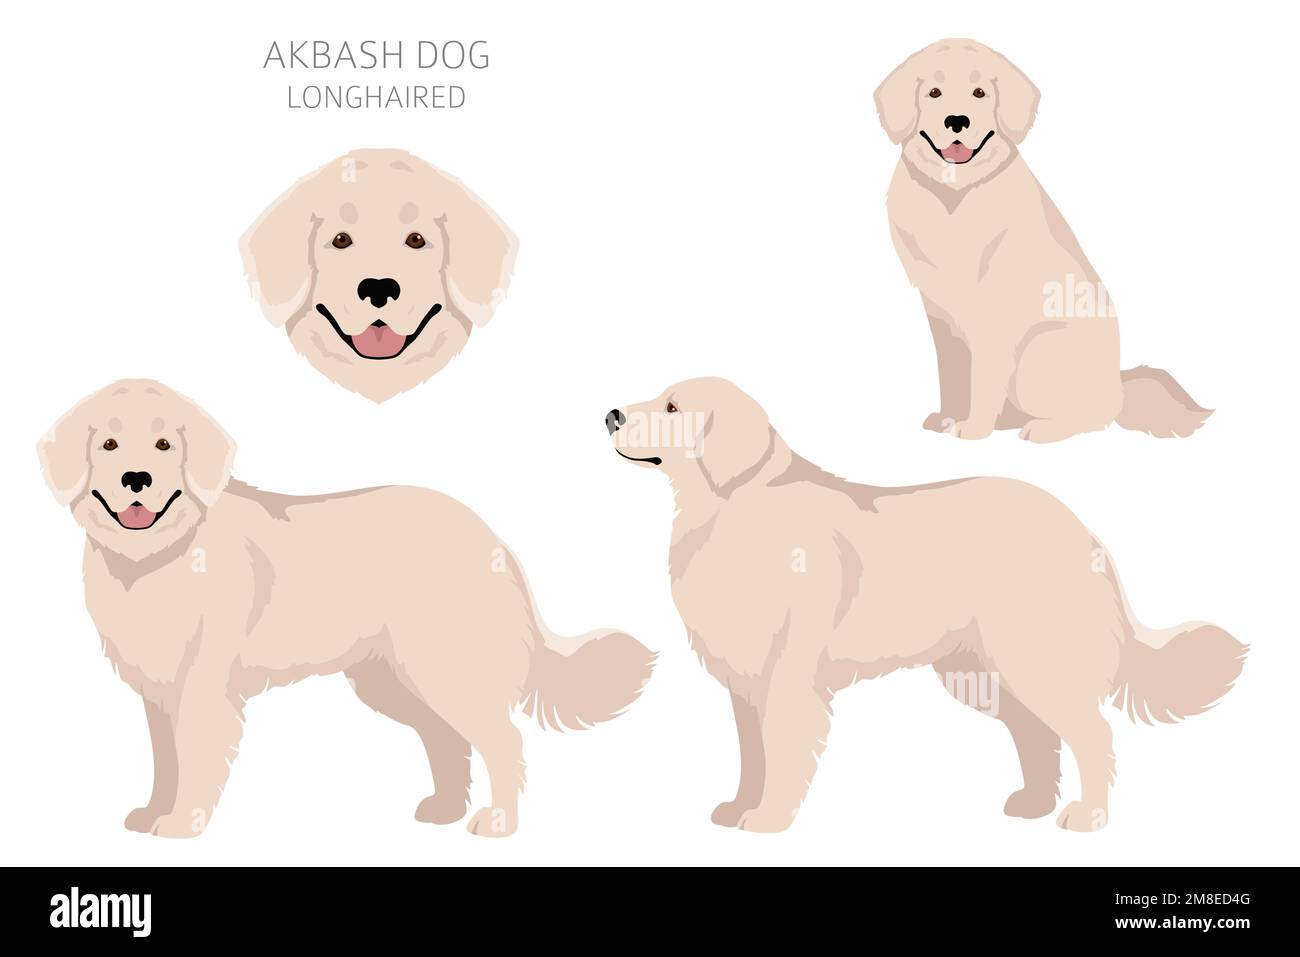 Akbash dog longhaired clipart. Different poses, coat colors set.  Vector illustration Stock Vector